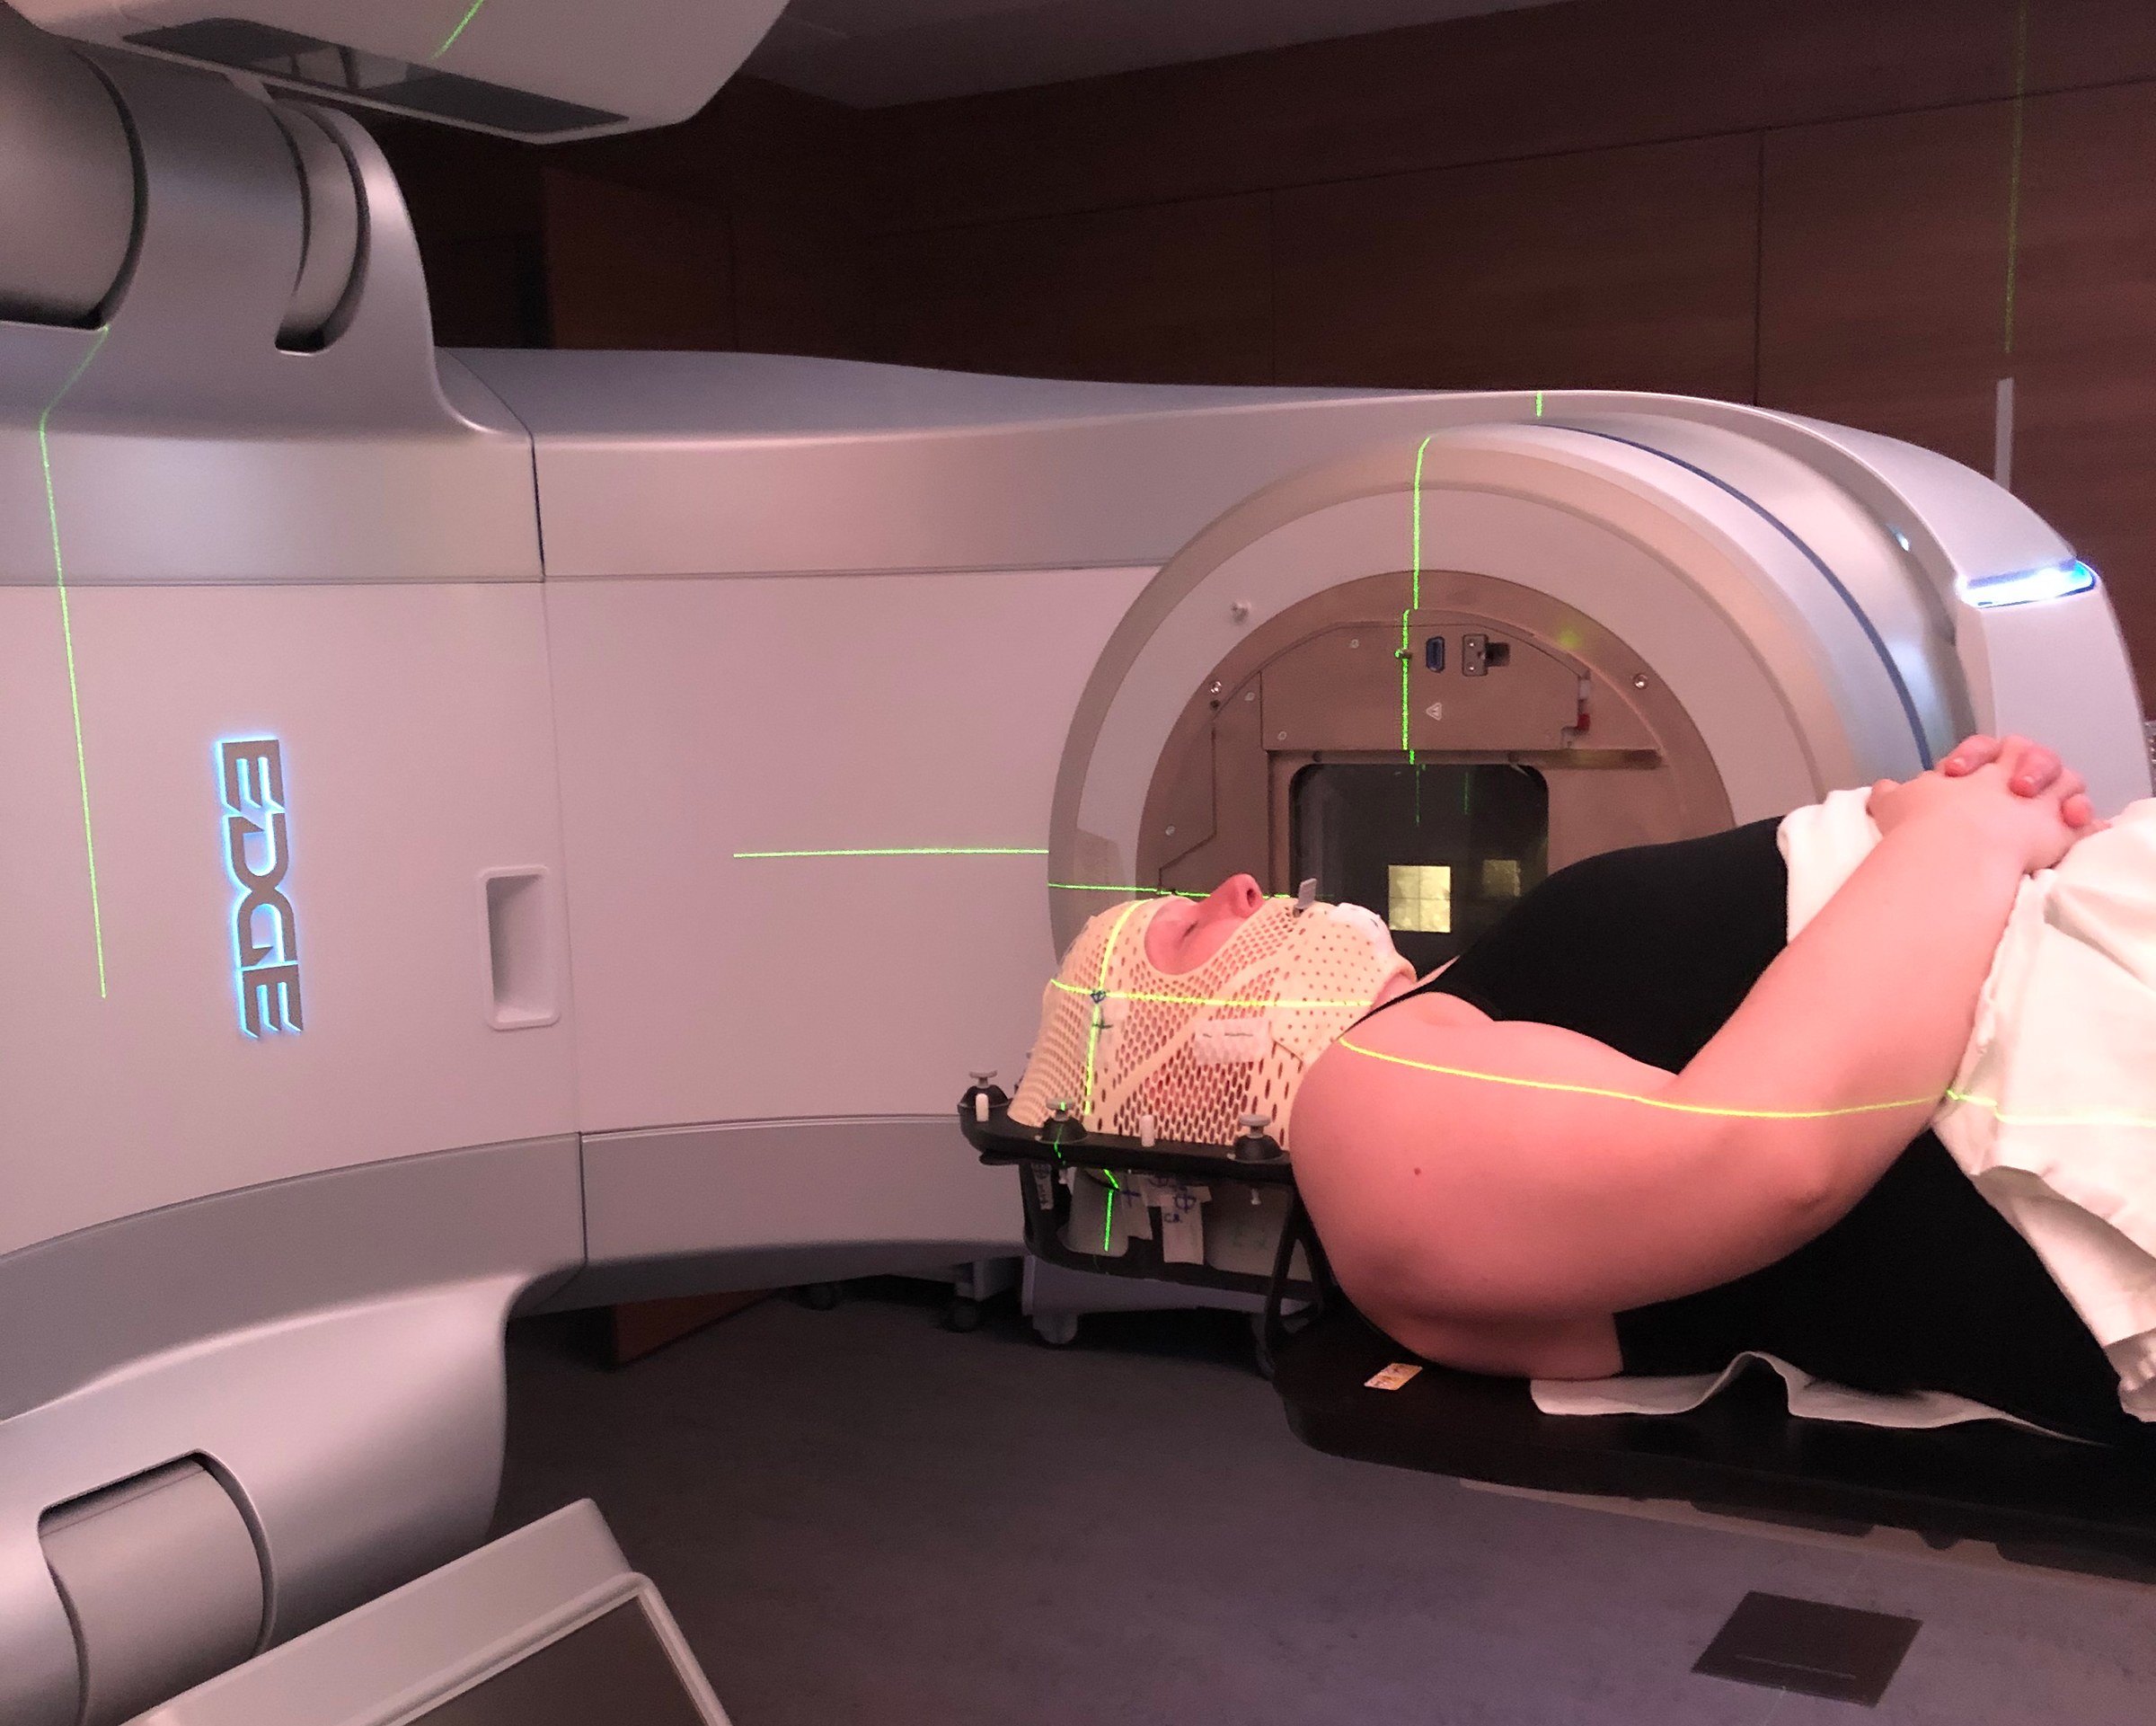 Geib undergoing radiation therapy in July 2020 to treat cancer that has spread to her brain (Courtesy Tori Geib)